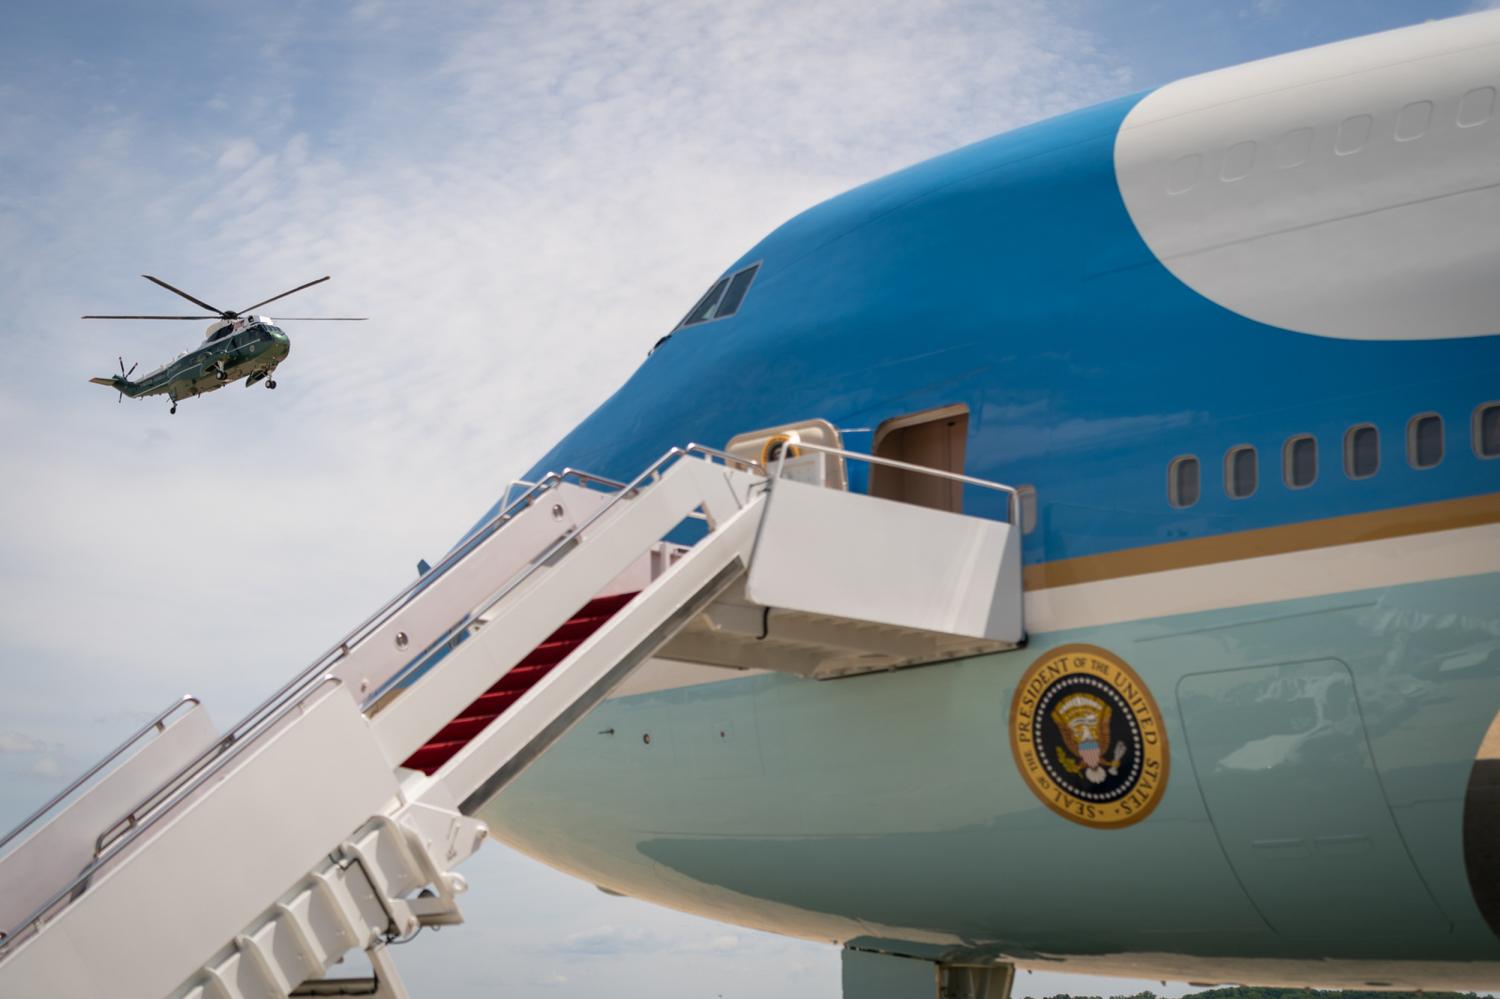 Marine One arrives at Joint Base Andrews, Maryland as Air Force One waits on the tarmac for President Joe Biden.